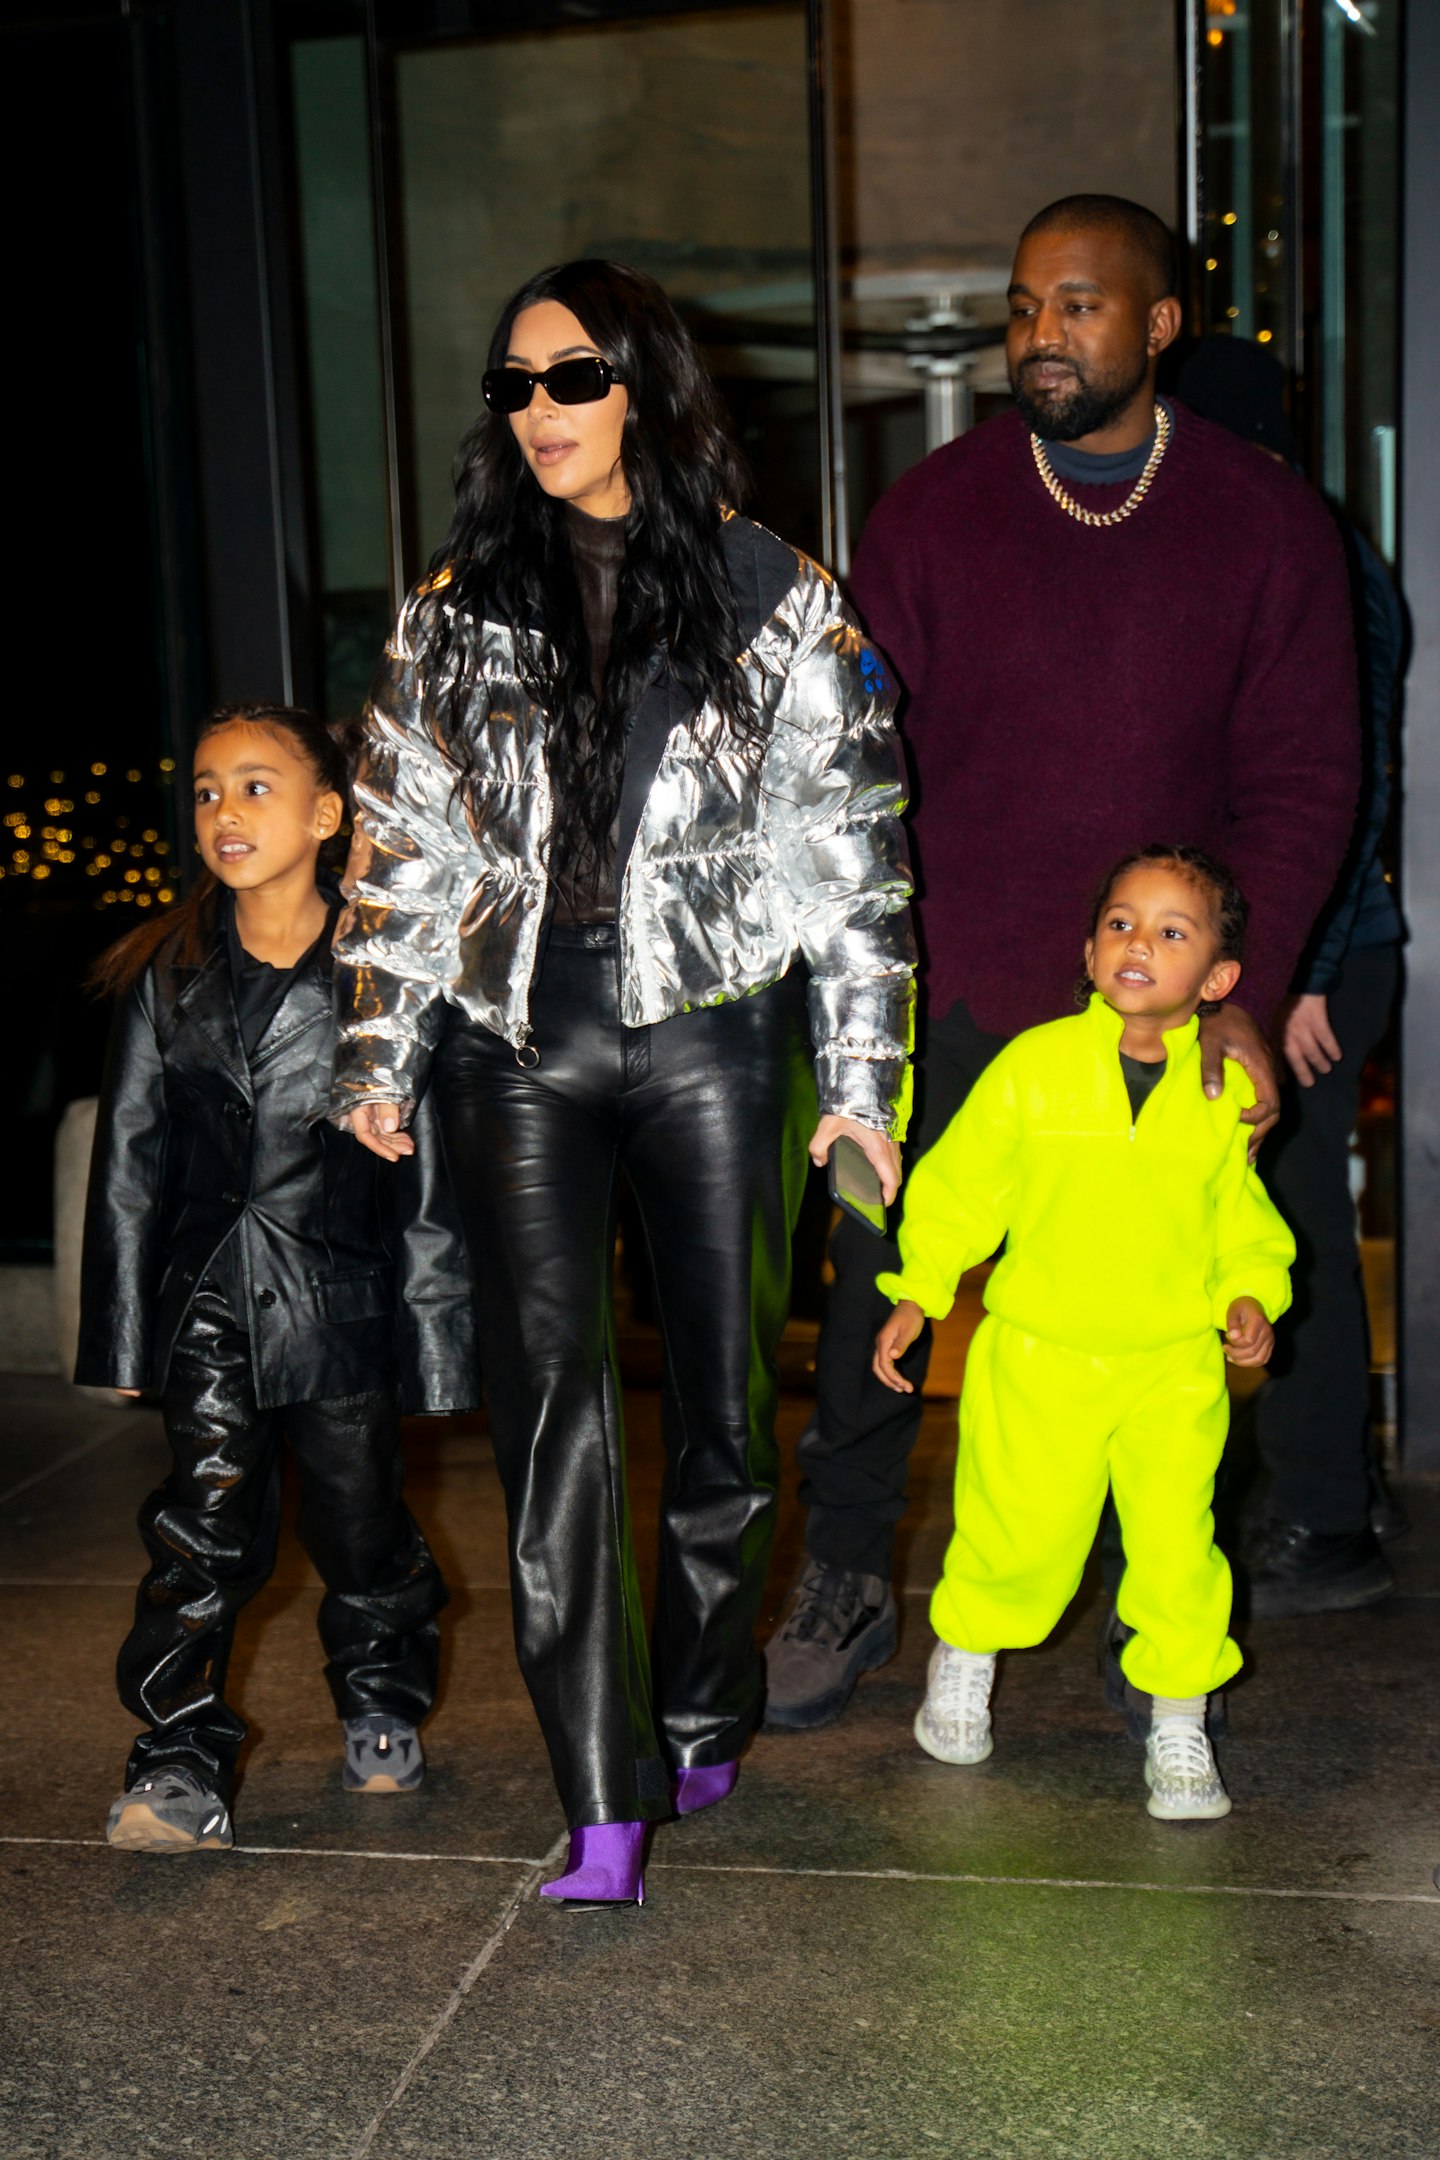 Kim Kardashian and Kanye West spotted in New York with North West, and Saint West